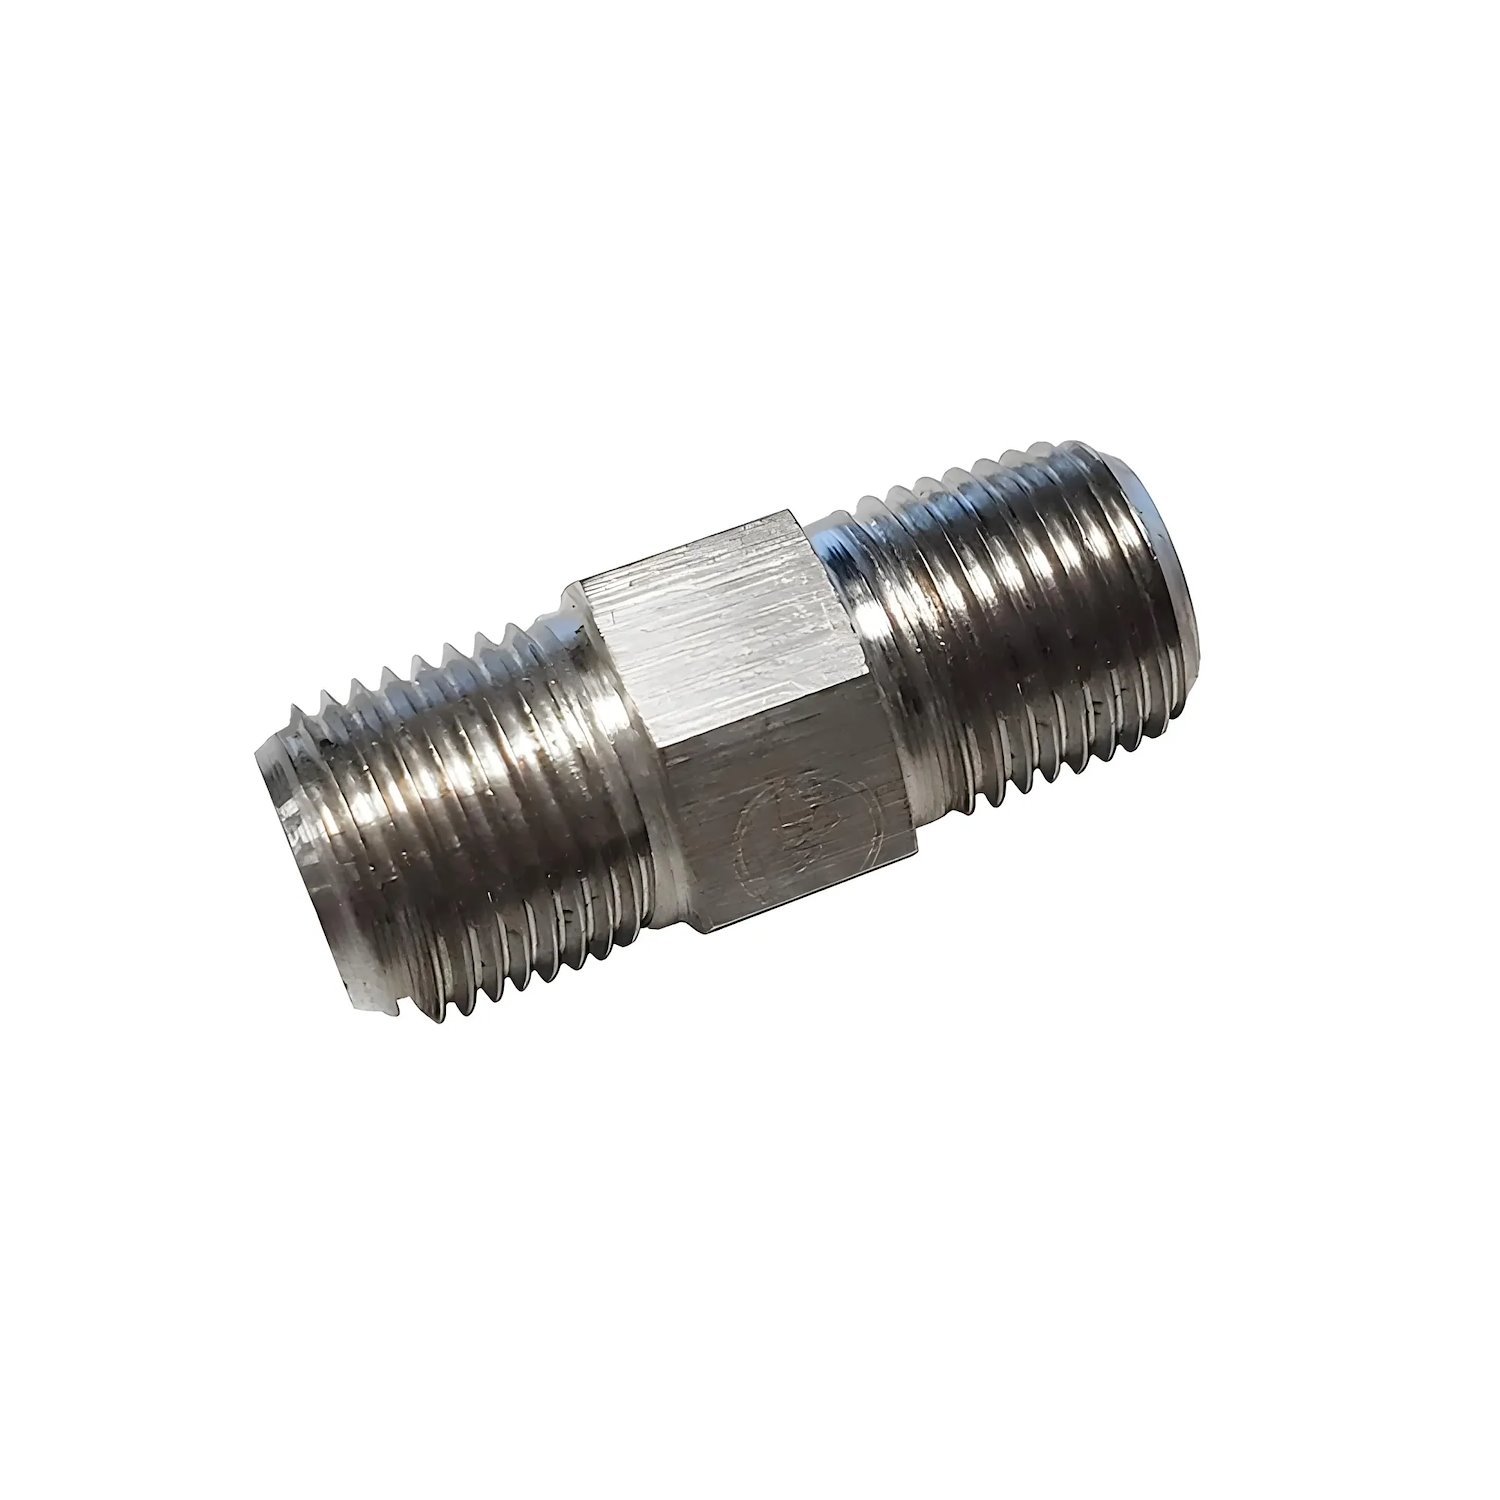 00-01100-SS 1/8 in. NPT x 1/8 in. NPT Straight Fitting, Male/Male, Stainless Steel